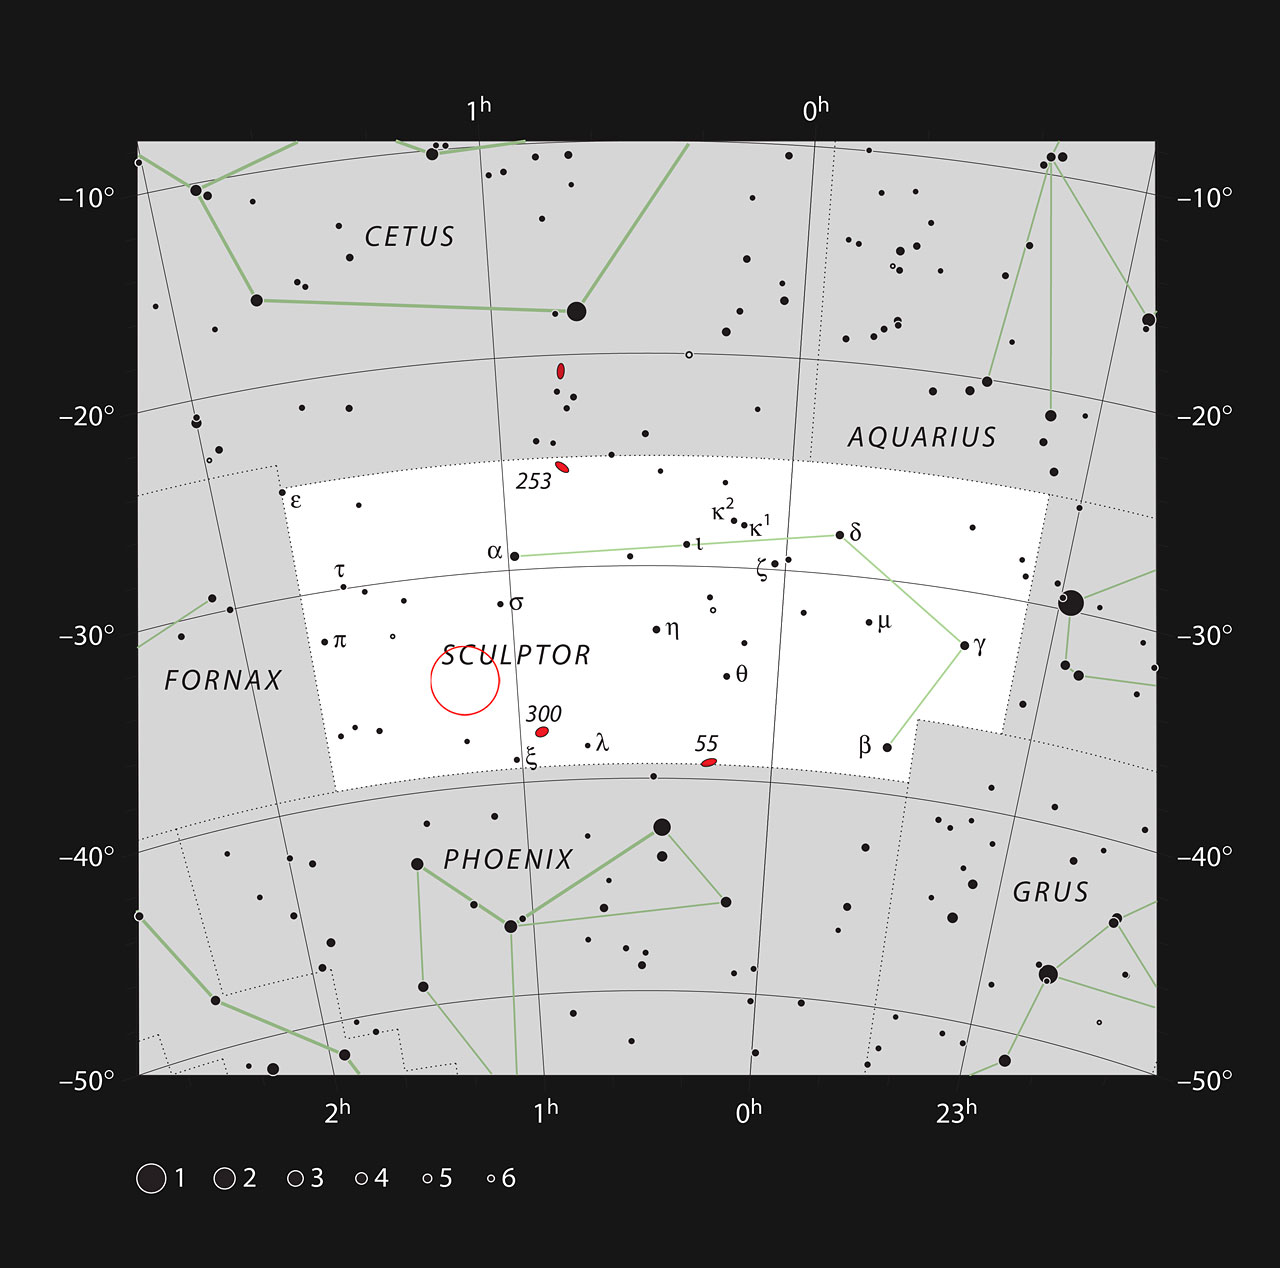 quasar HE0109-3518 in the constellation of Sculptor